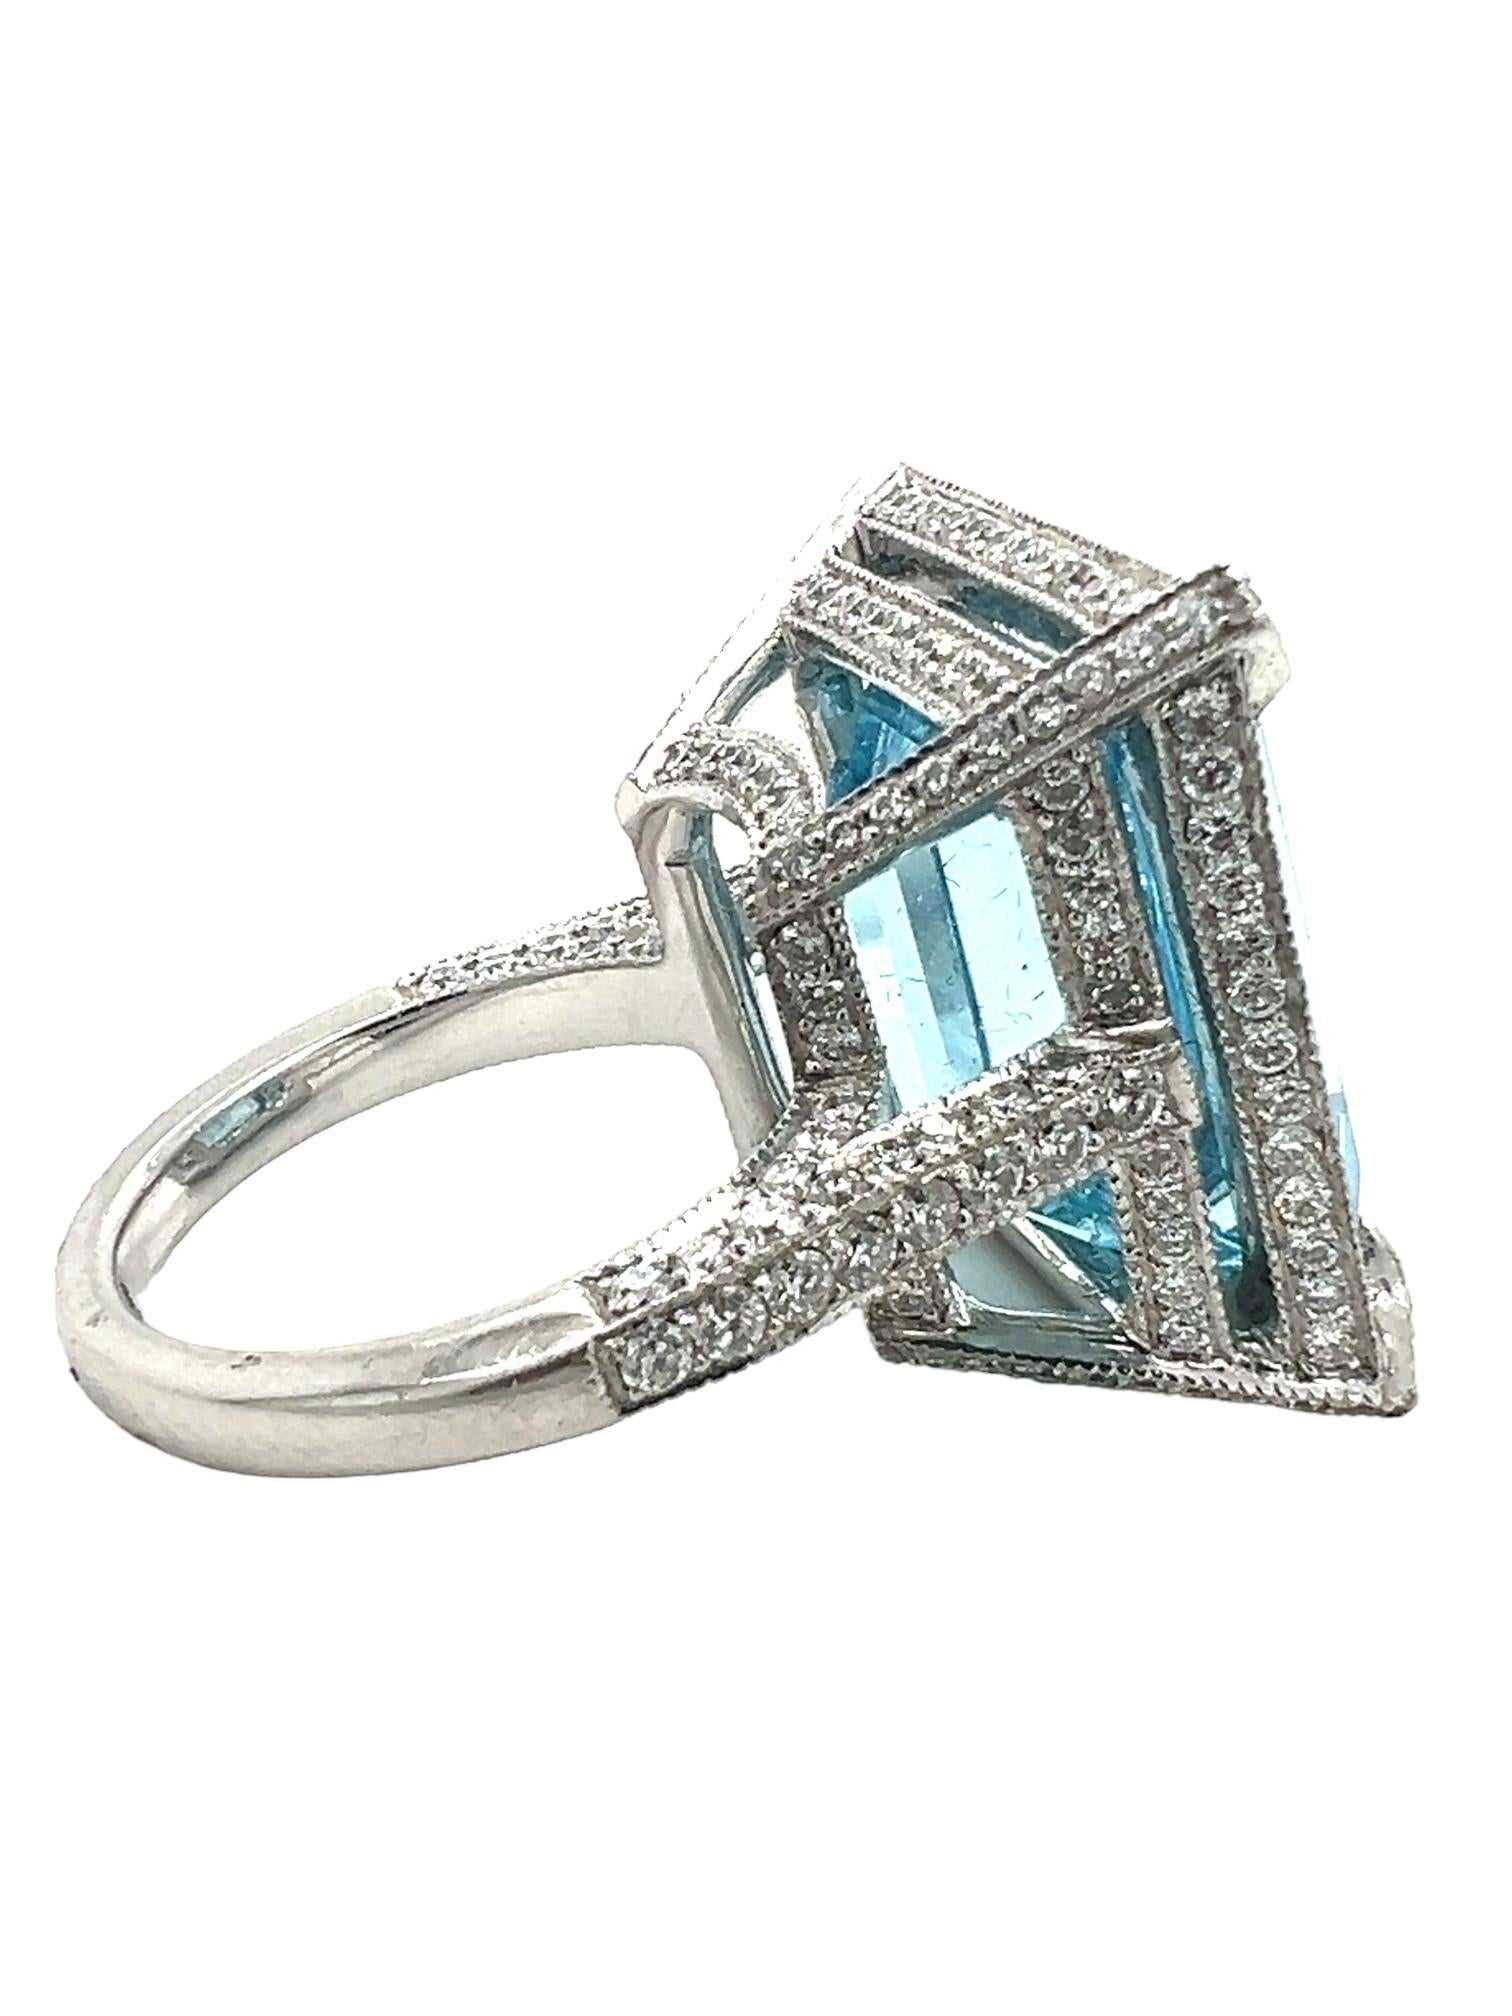 Sophia D. 20.54 Carat Aquamarine Ring In New Condition For Sale In New York, NY